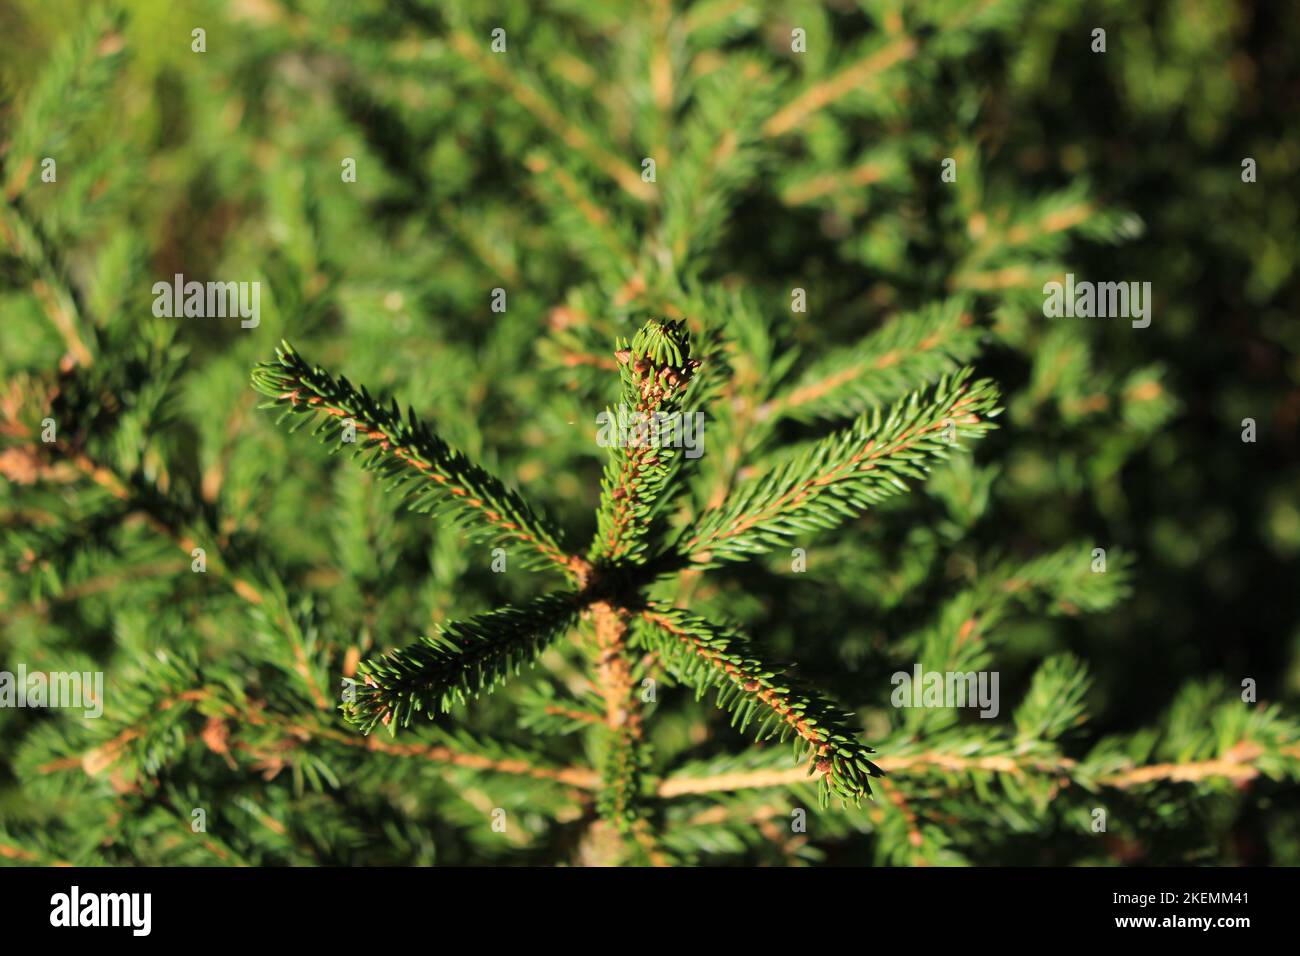 Top of young evergreen conifer sapling (Spruce) with other young spruces in blurred background. Concept for young Christmas tree, rewilding a forest Stock Photo